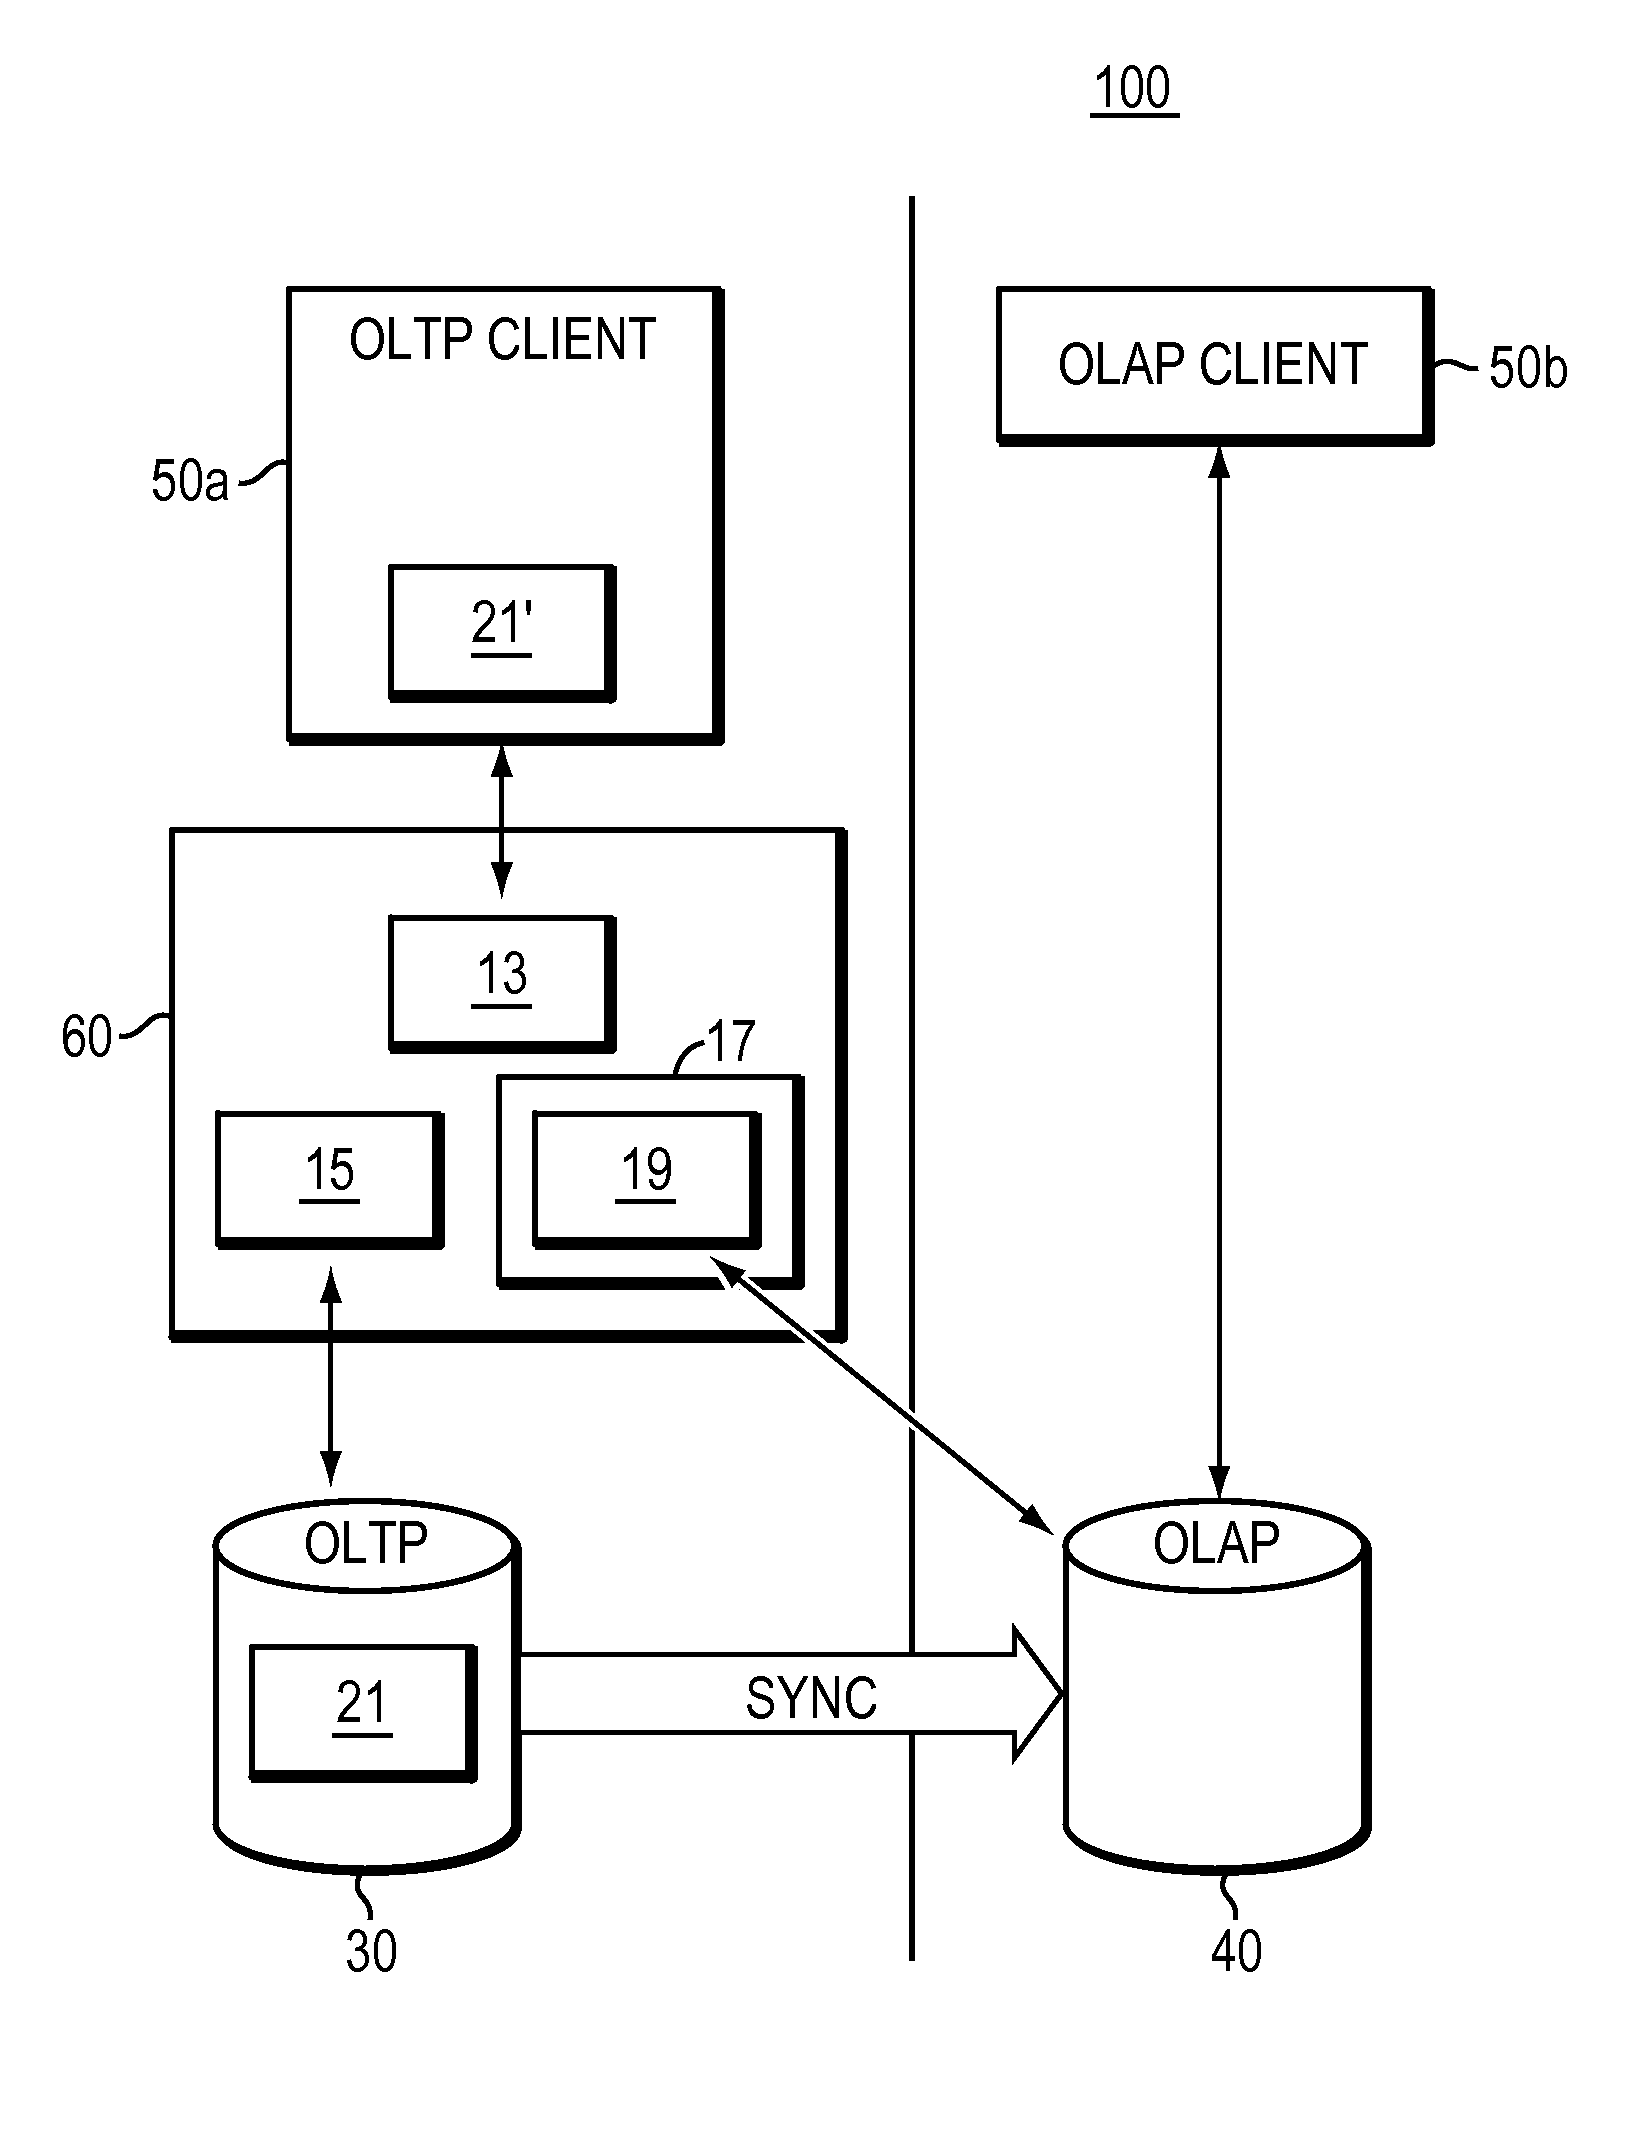 Computer method and system for combining OLTP database and OLAP database environments